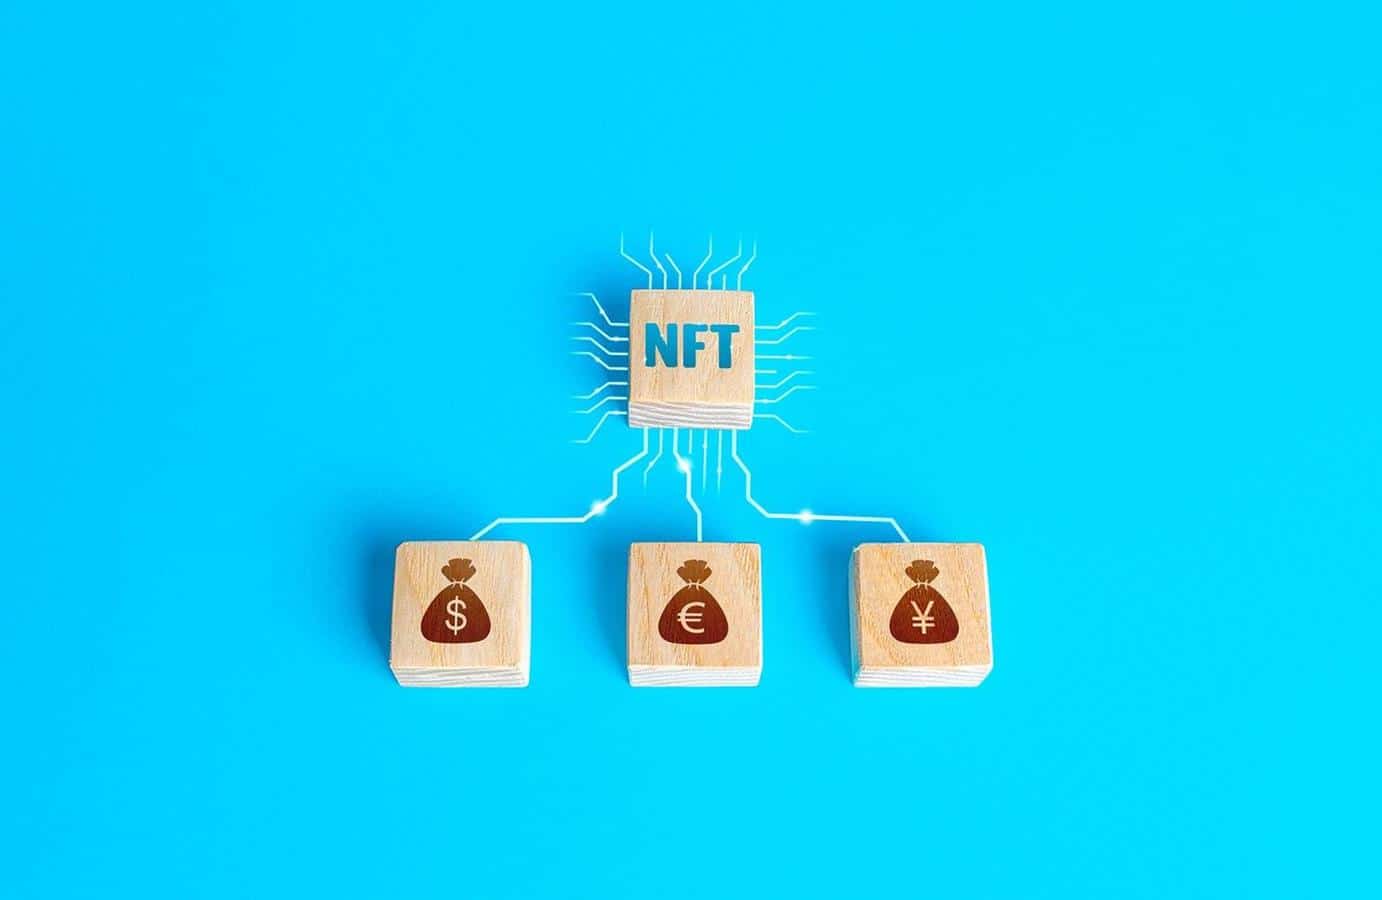 Instagram and Facebook with money machines?  The Meta work on the NFT has started